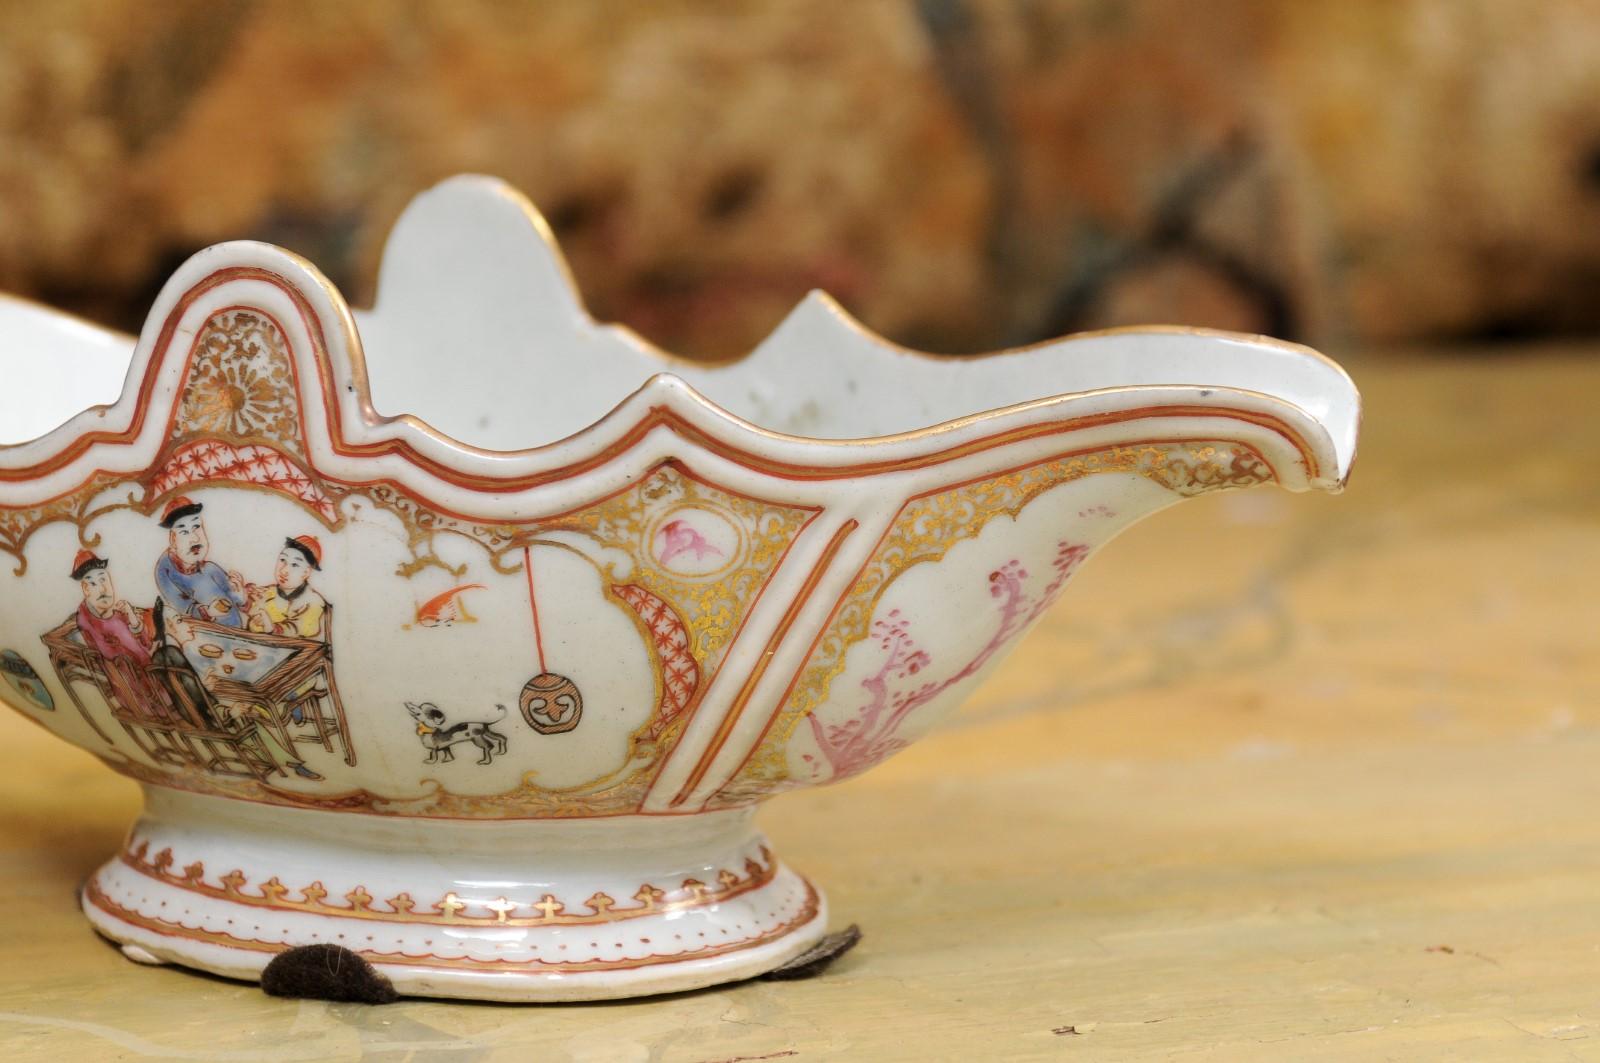  Late 18th Century Chinese Export Porcelain Sauce Boat For Sale 10